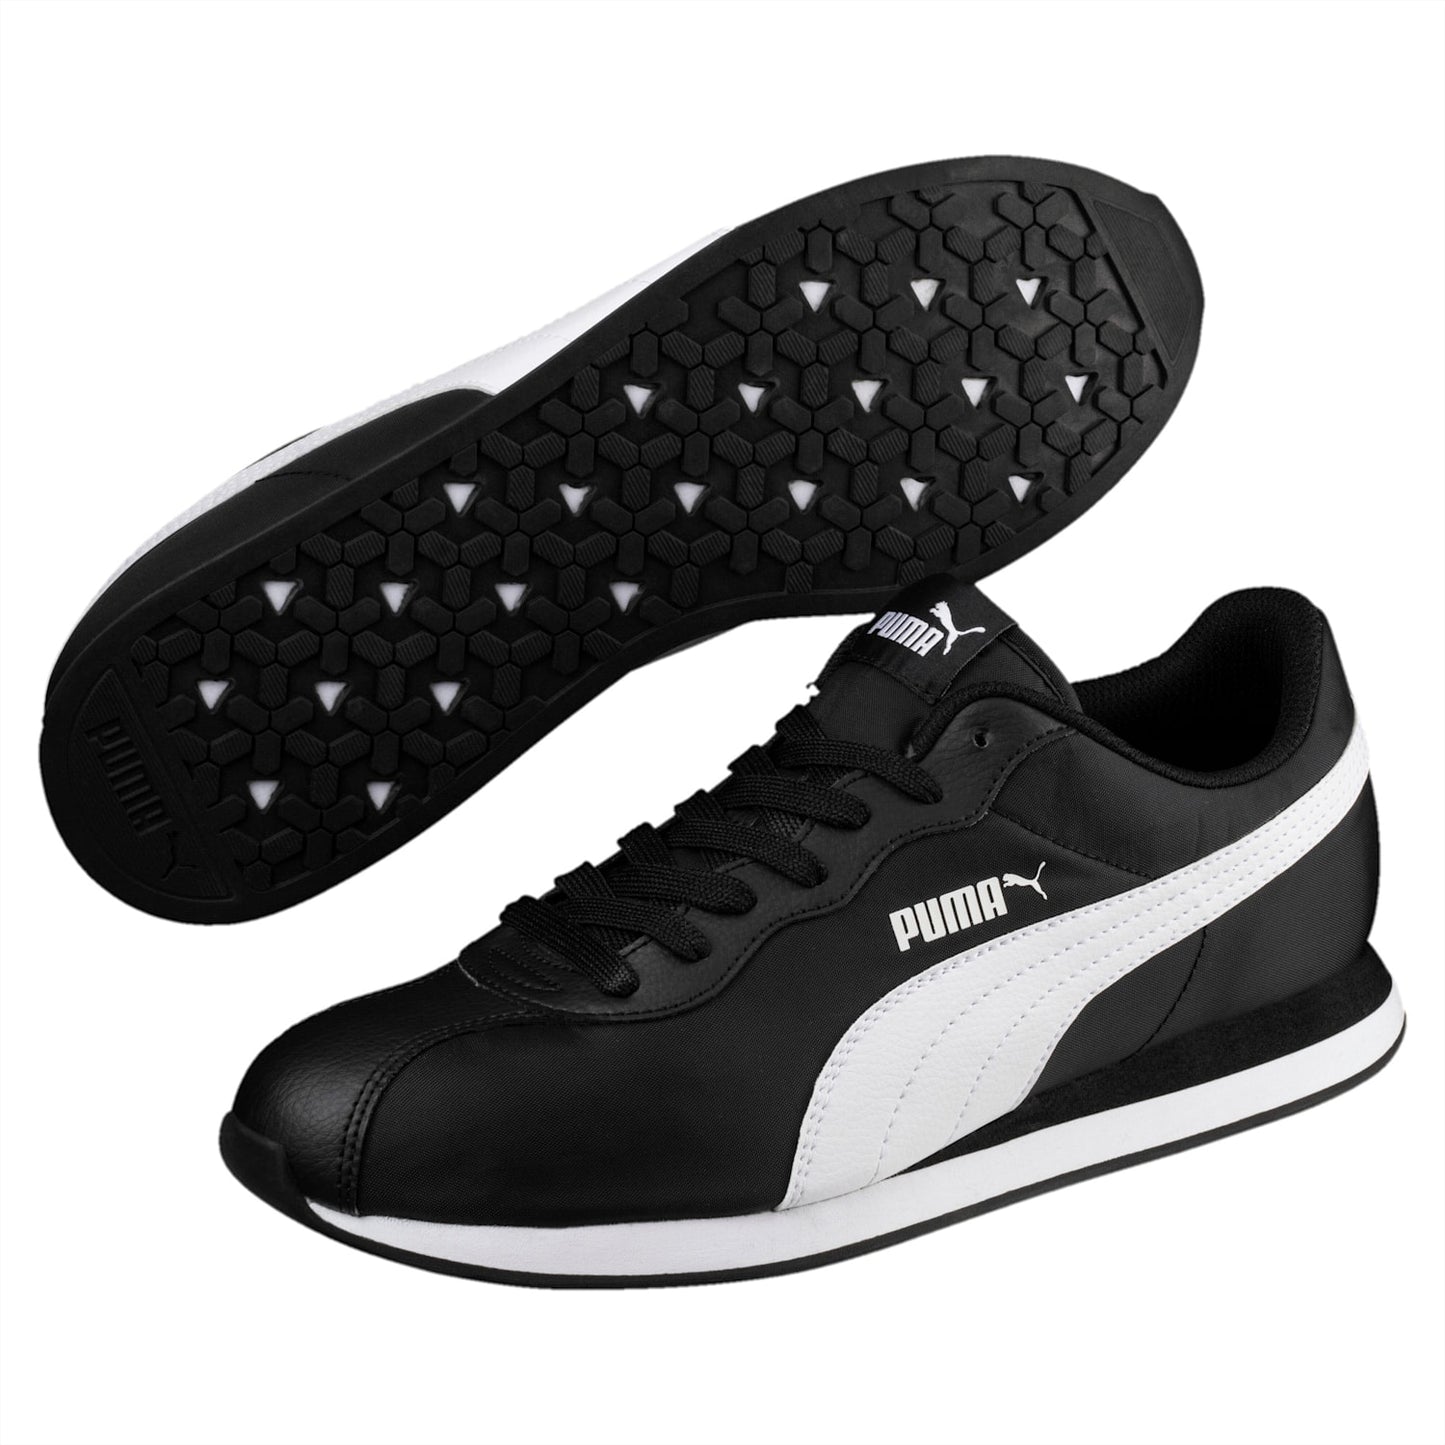 Turin II NL Low-Top Casual Shoes-366963 01